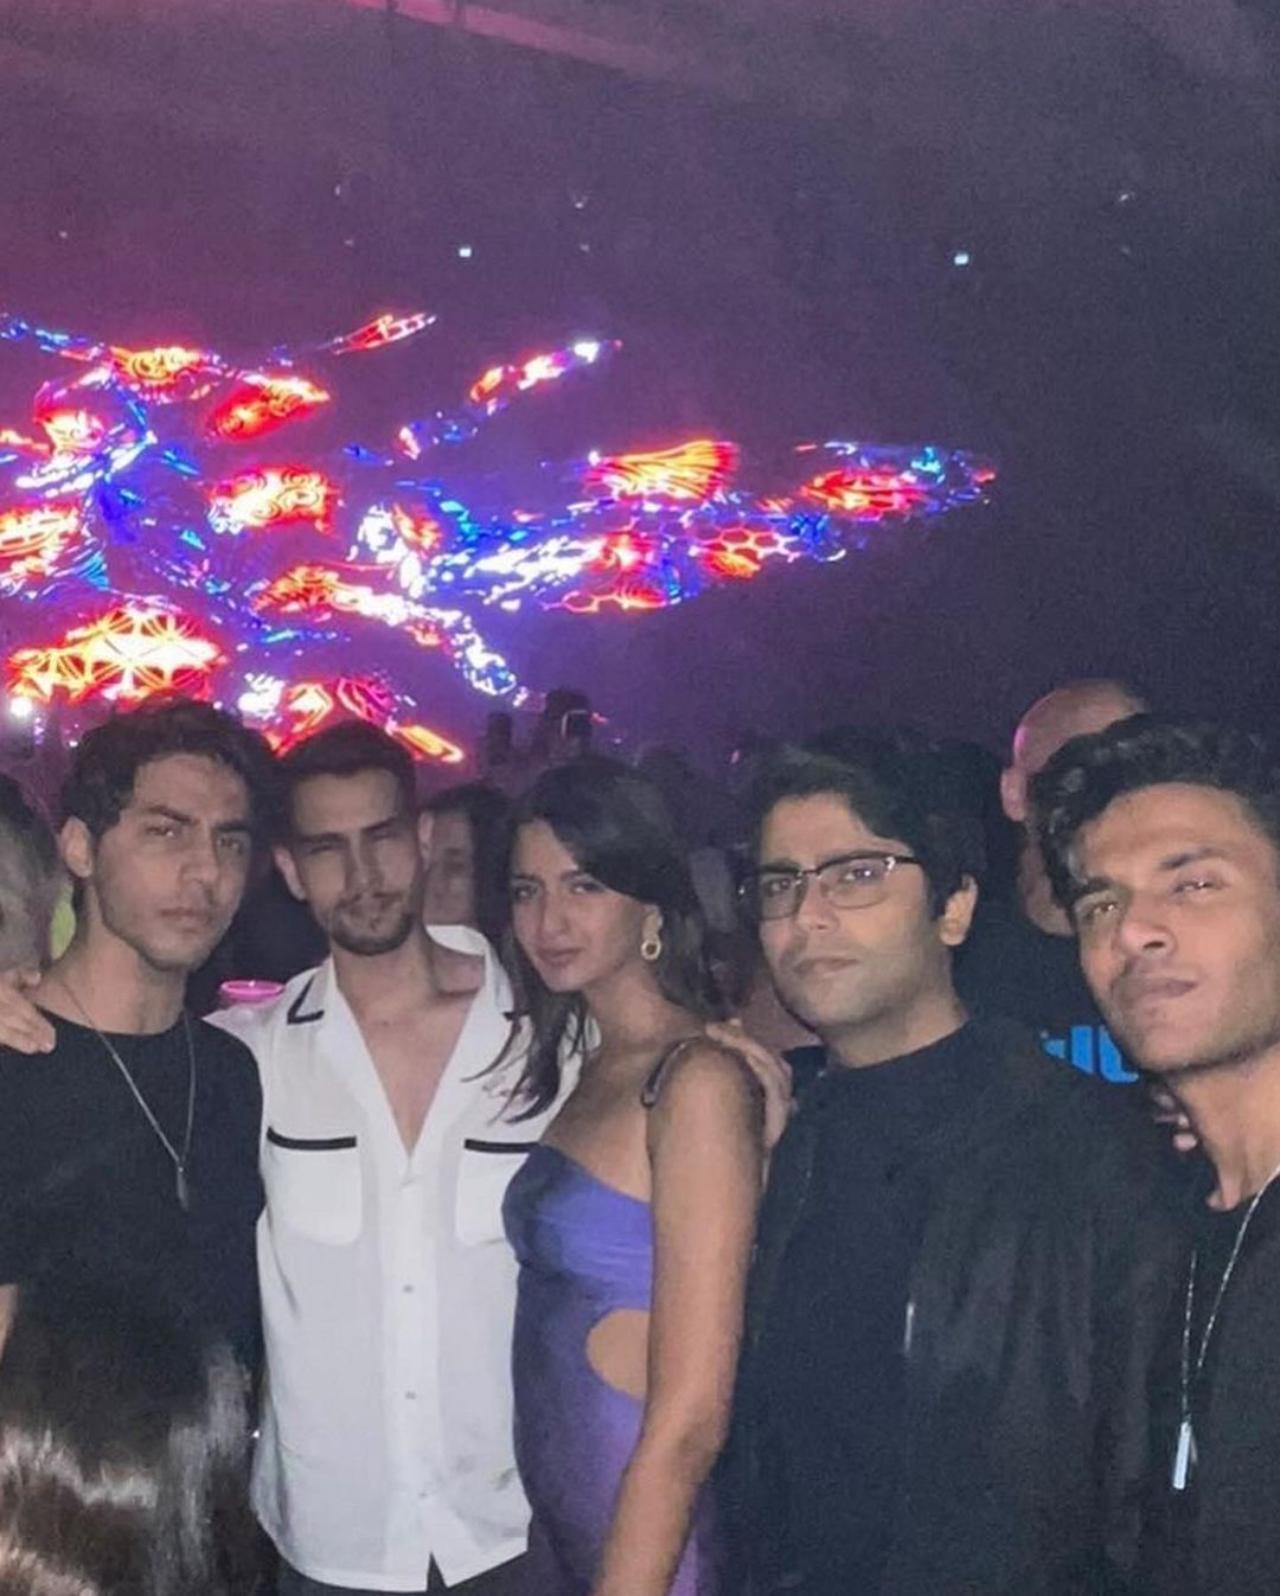 Shah Rukh Khan's son Aryan Khan was also seen at the party. He is seen posing with friends in the above picture. The star kid kept his look simple as he wore a plain black T-shirt